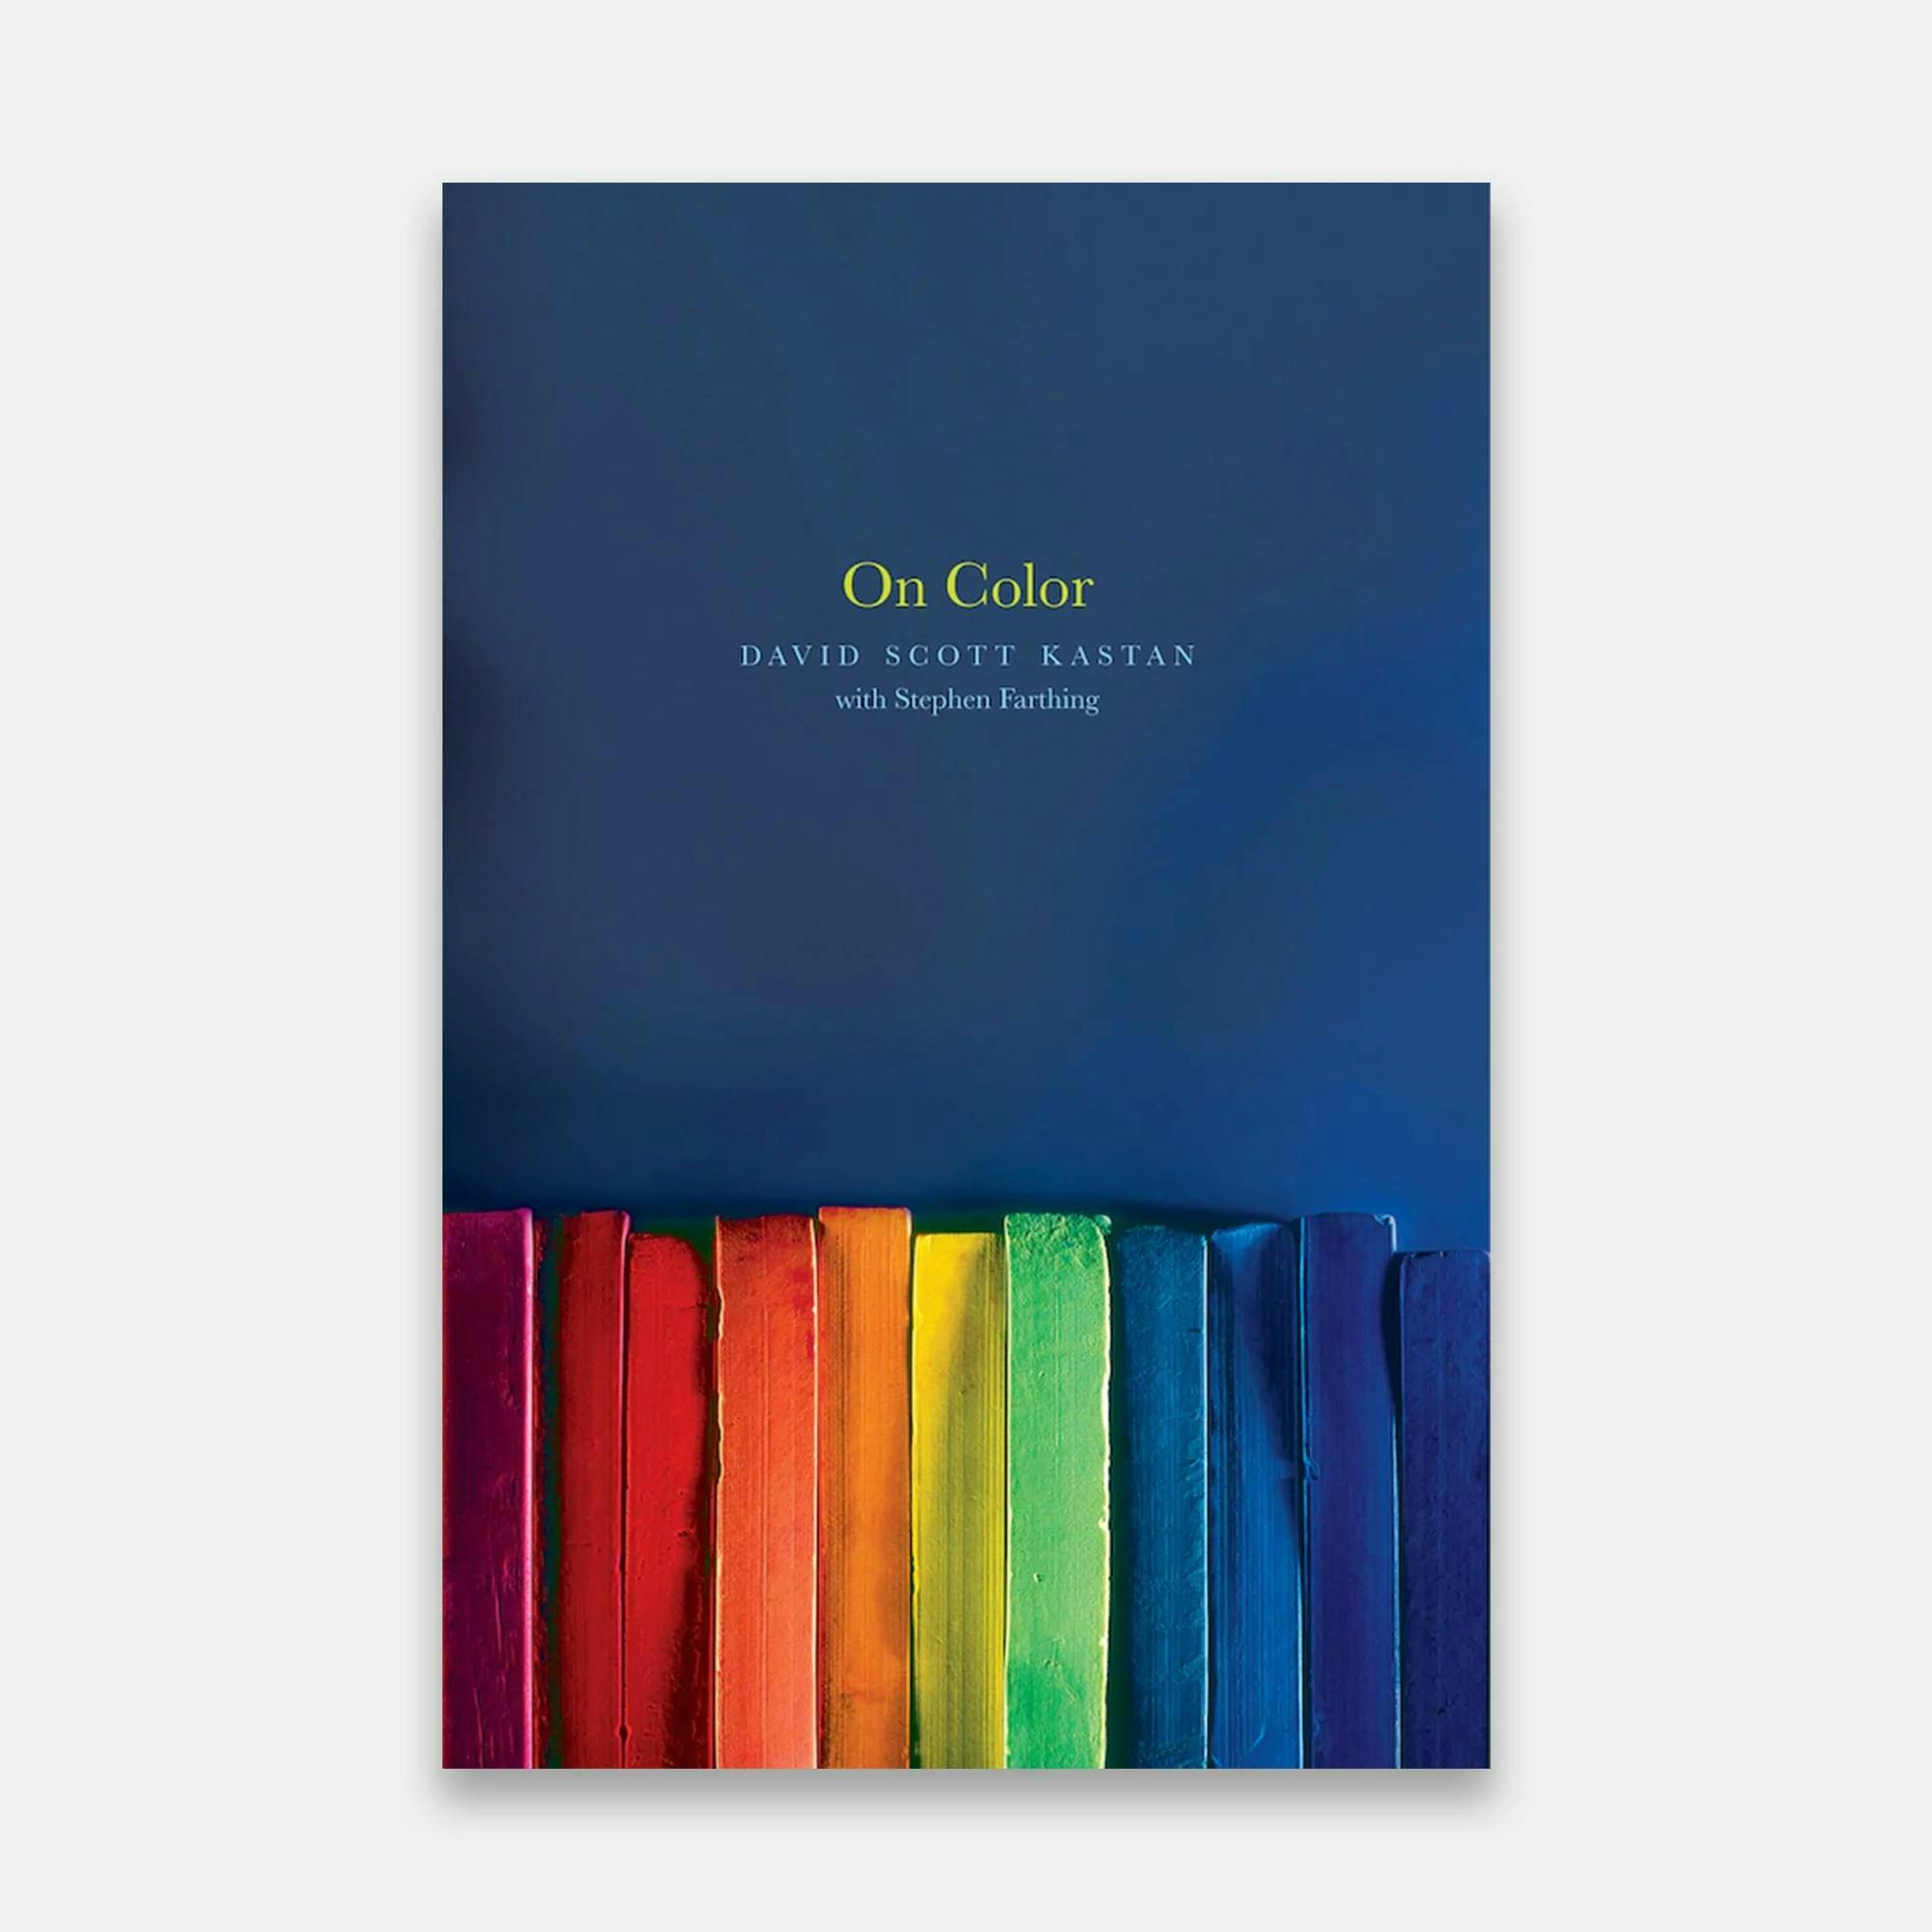 Book cover with a dark blue background and a rainbow of pastels